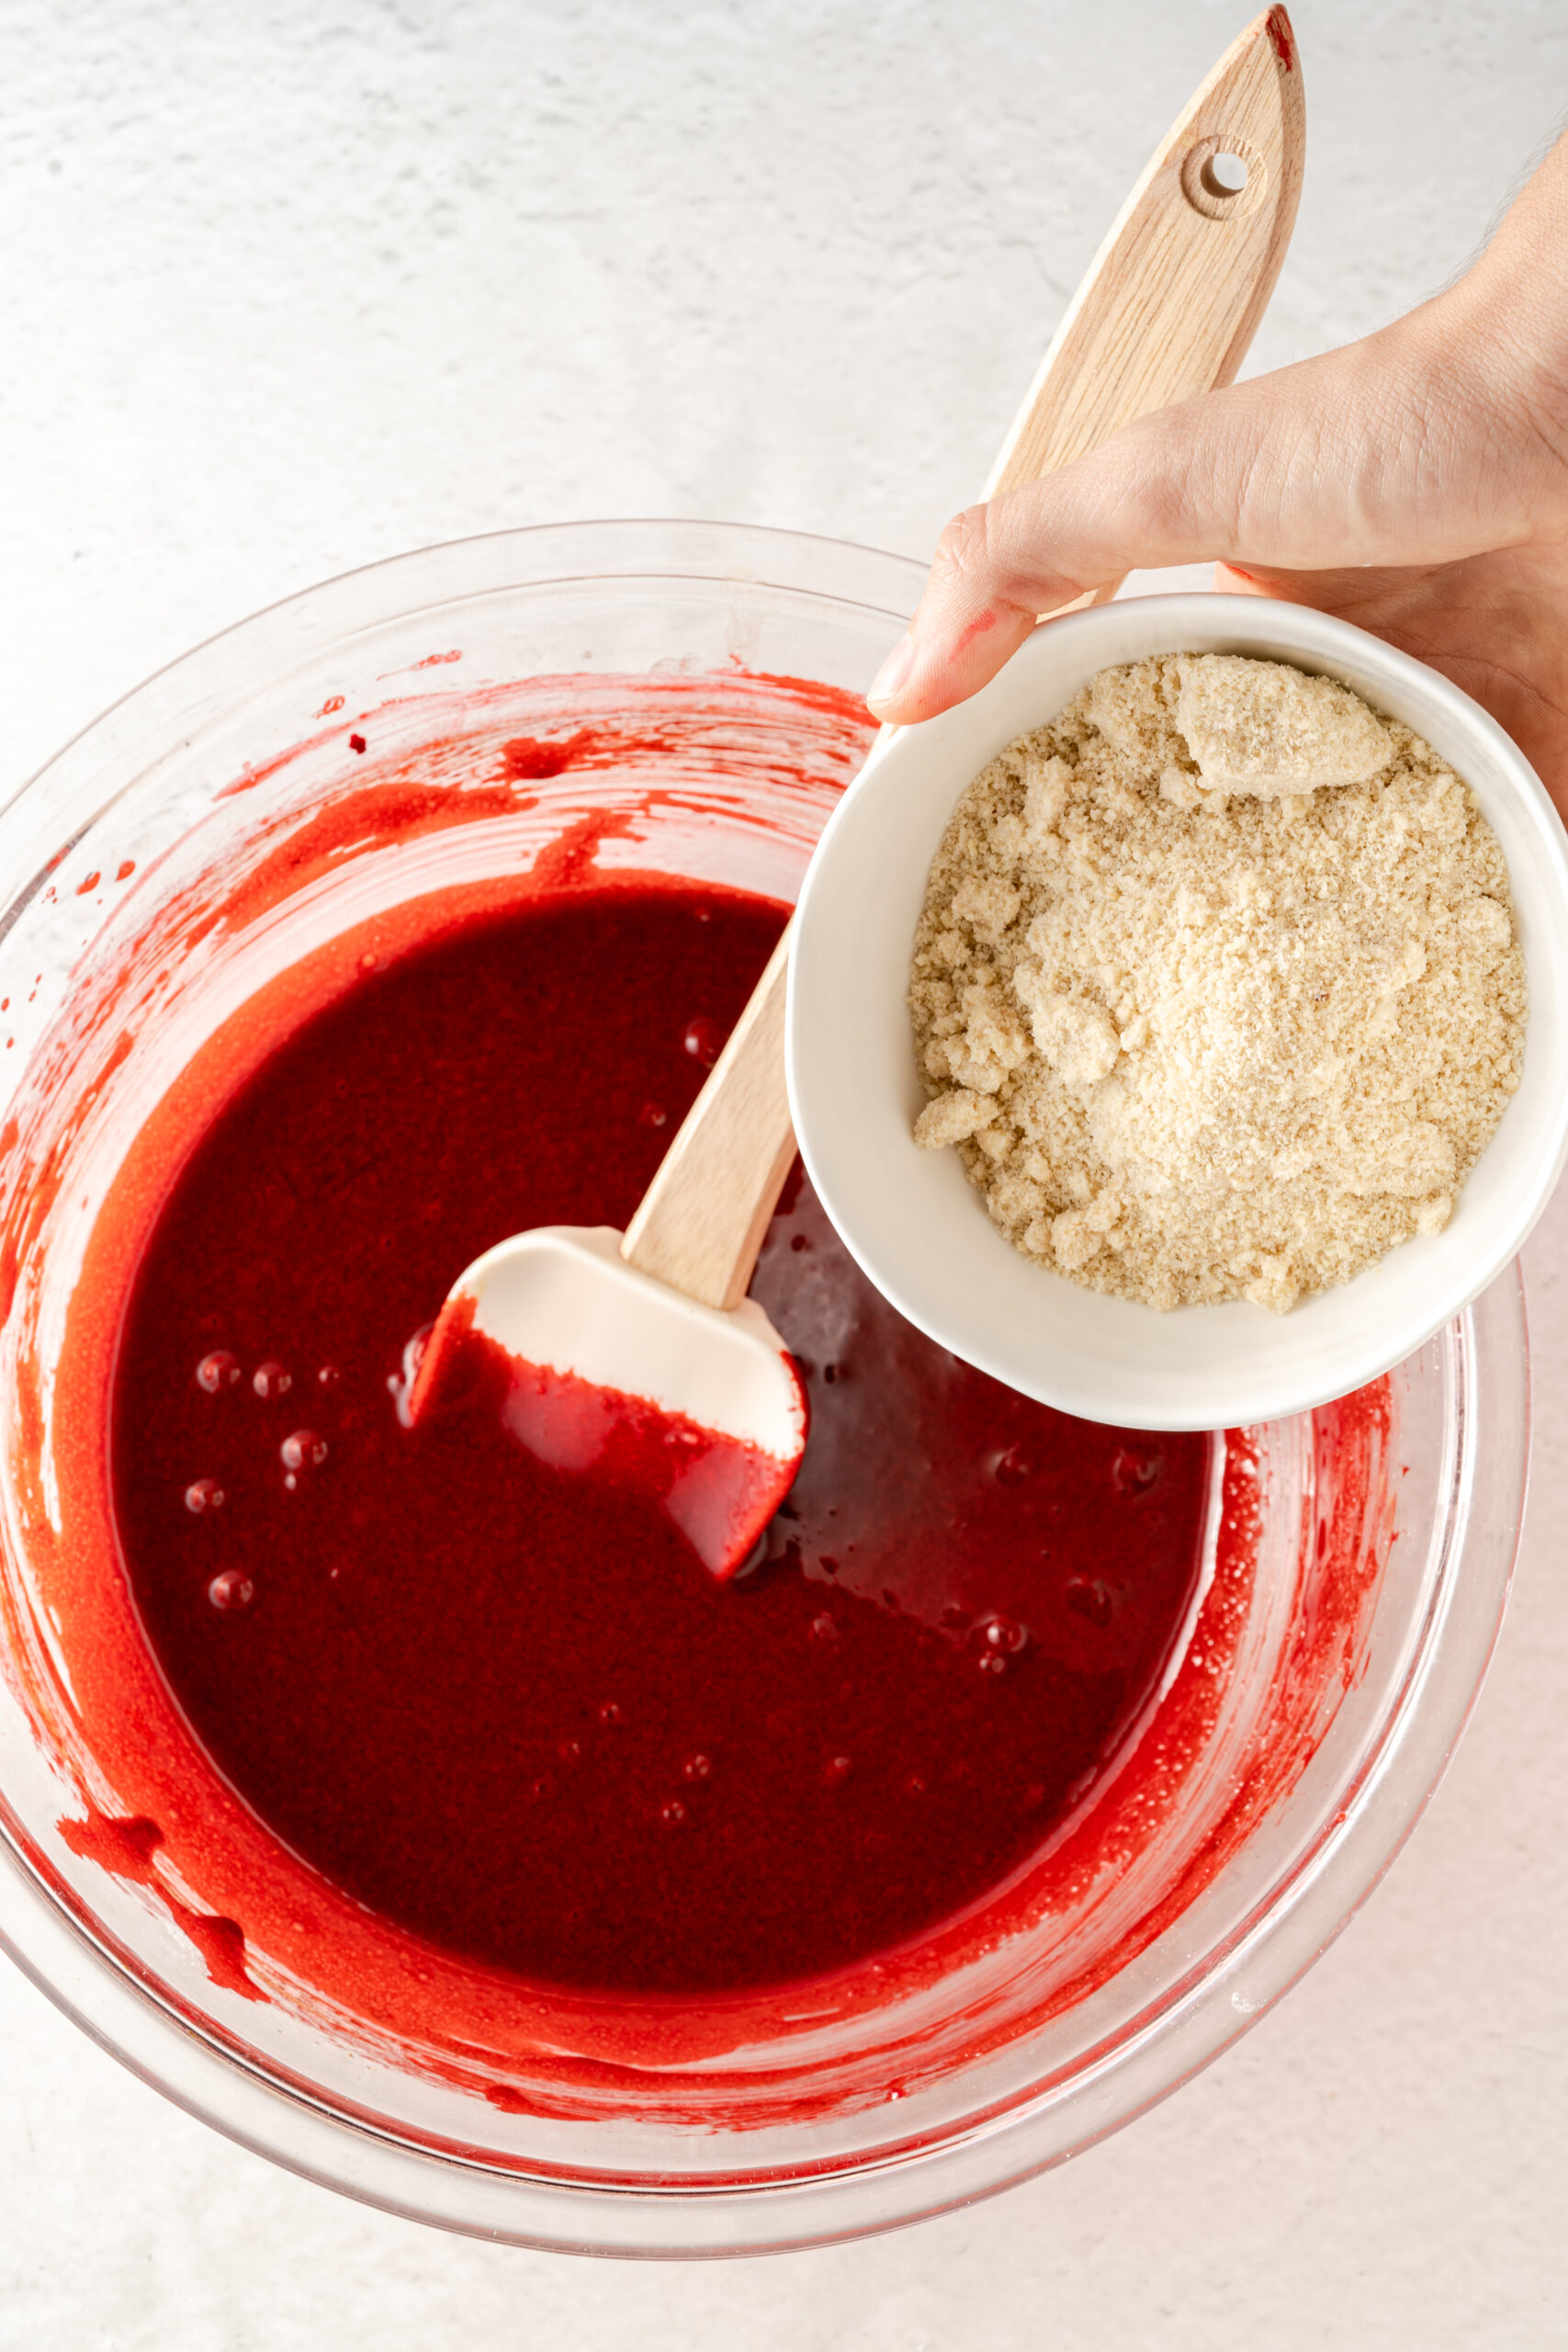 Red mixture in large mixing bowl with whisk and small white bowl of almond flour being added in.